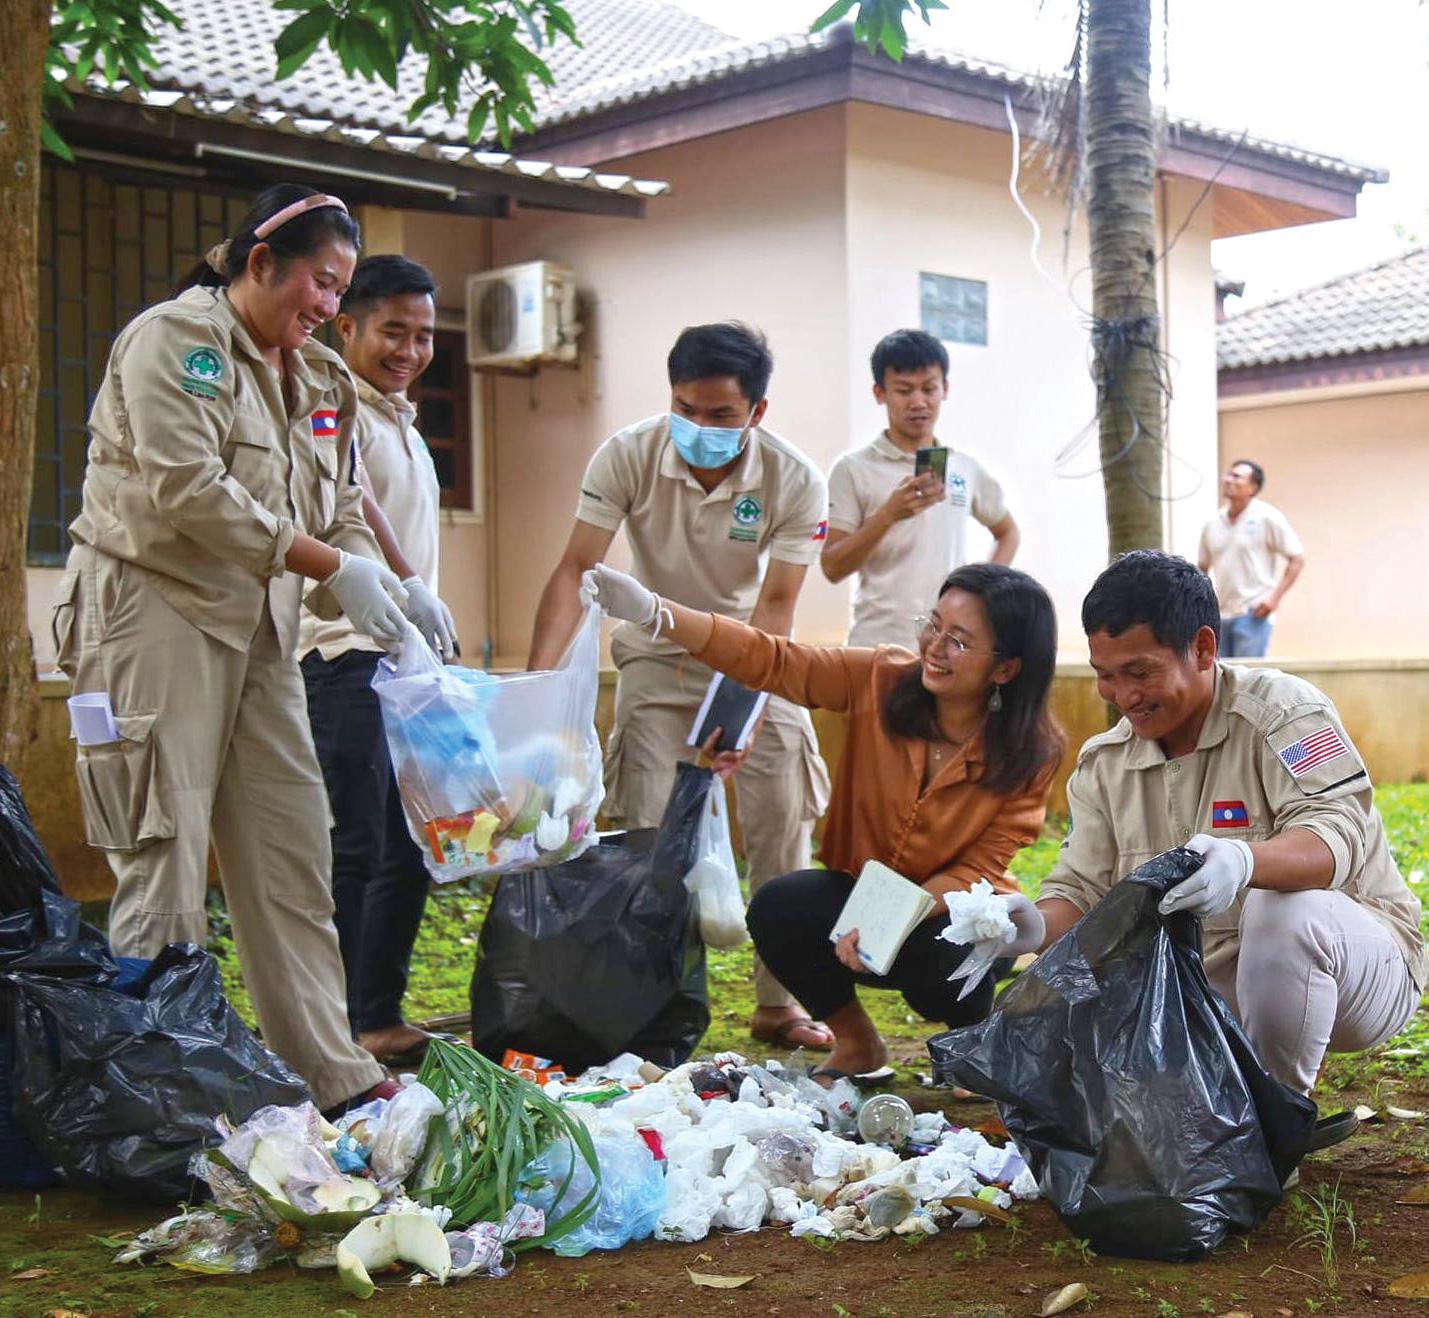 A group of people sort through office trash to pull out recyclable material.